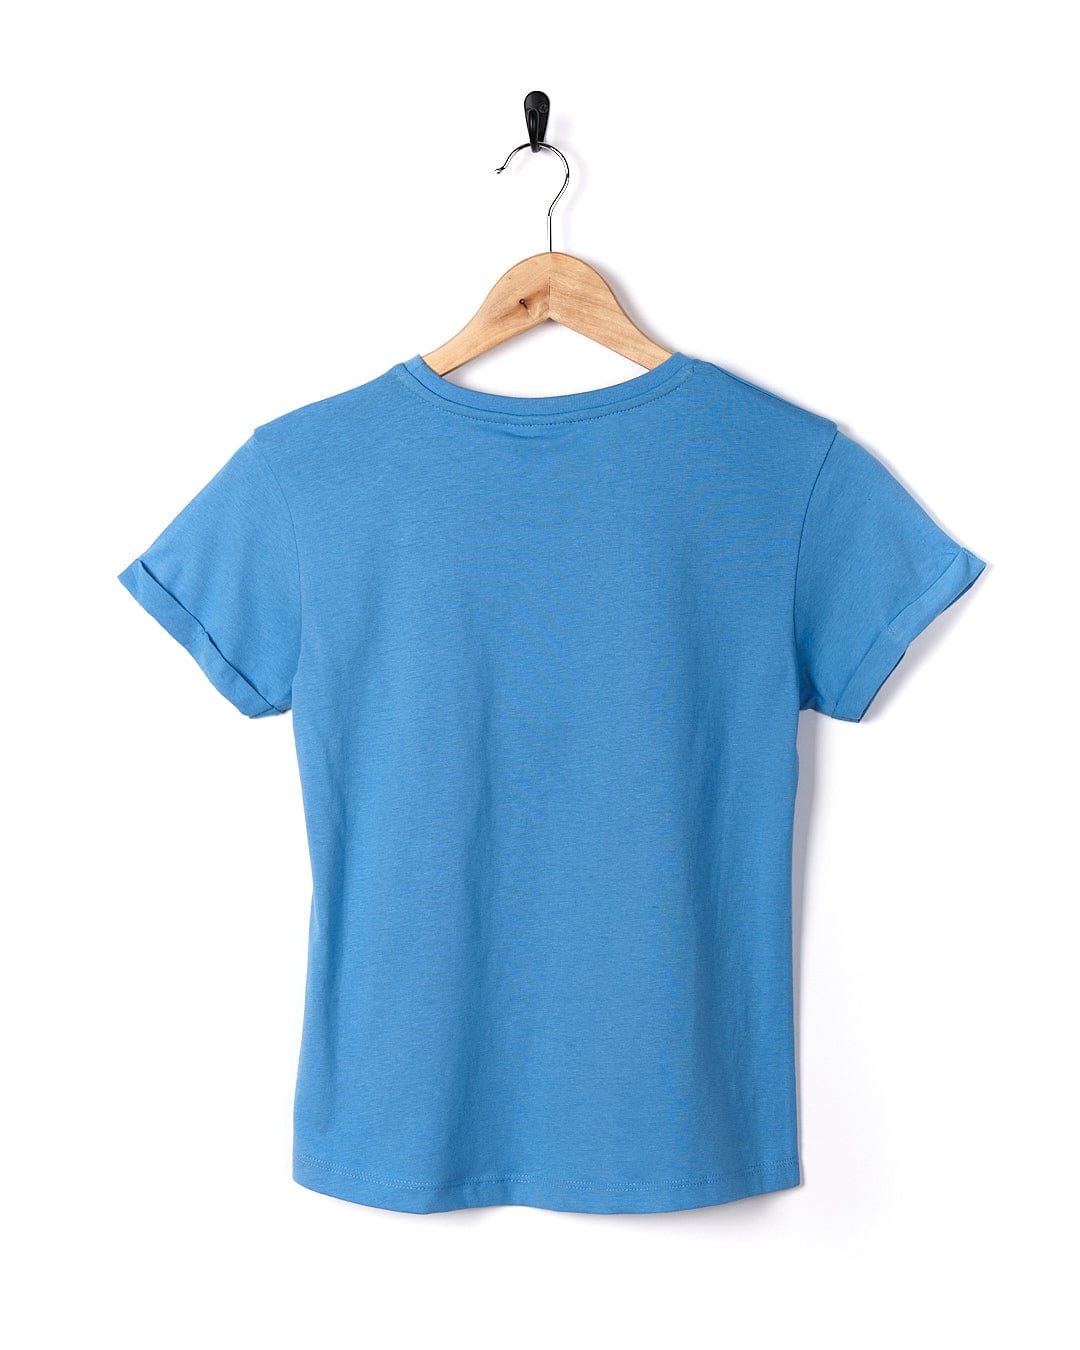 A Mermaid Surf - Kids Short Sleeve T-Shirt - Light Blue with a "Love Your Ocean" message hanging on a wooden hanger.